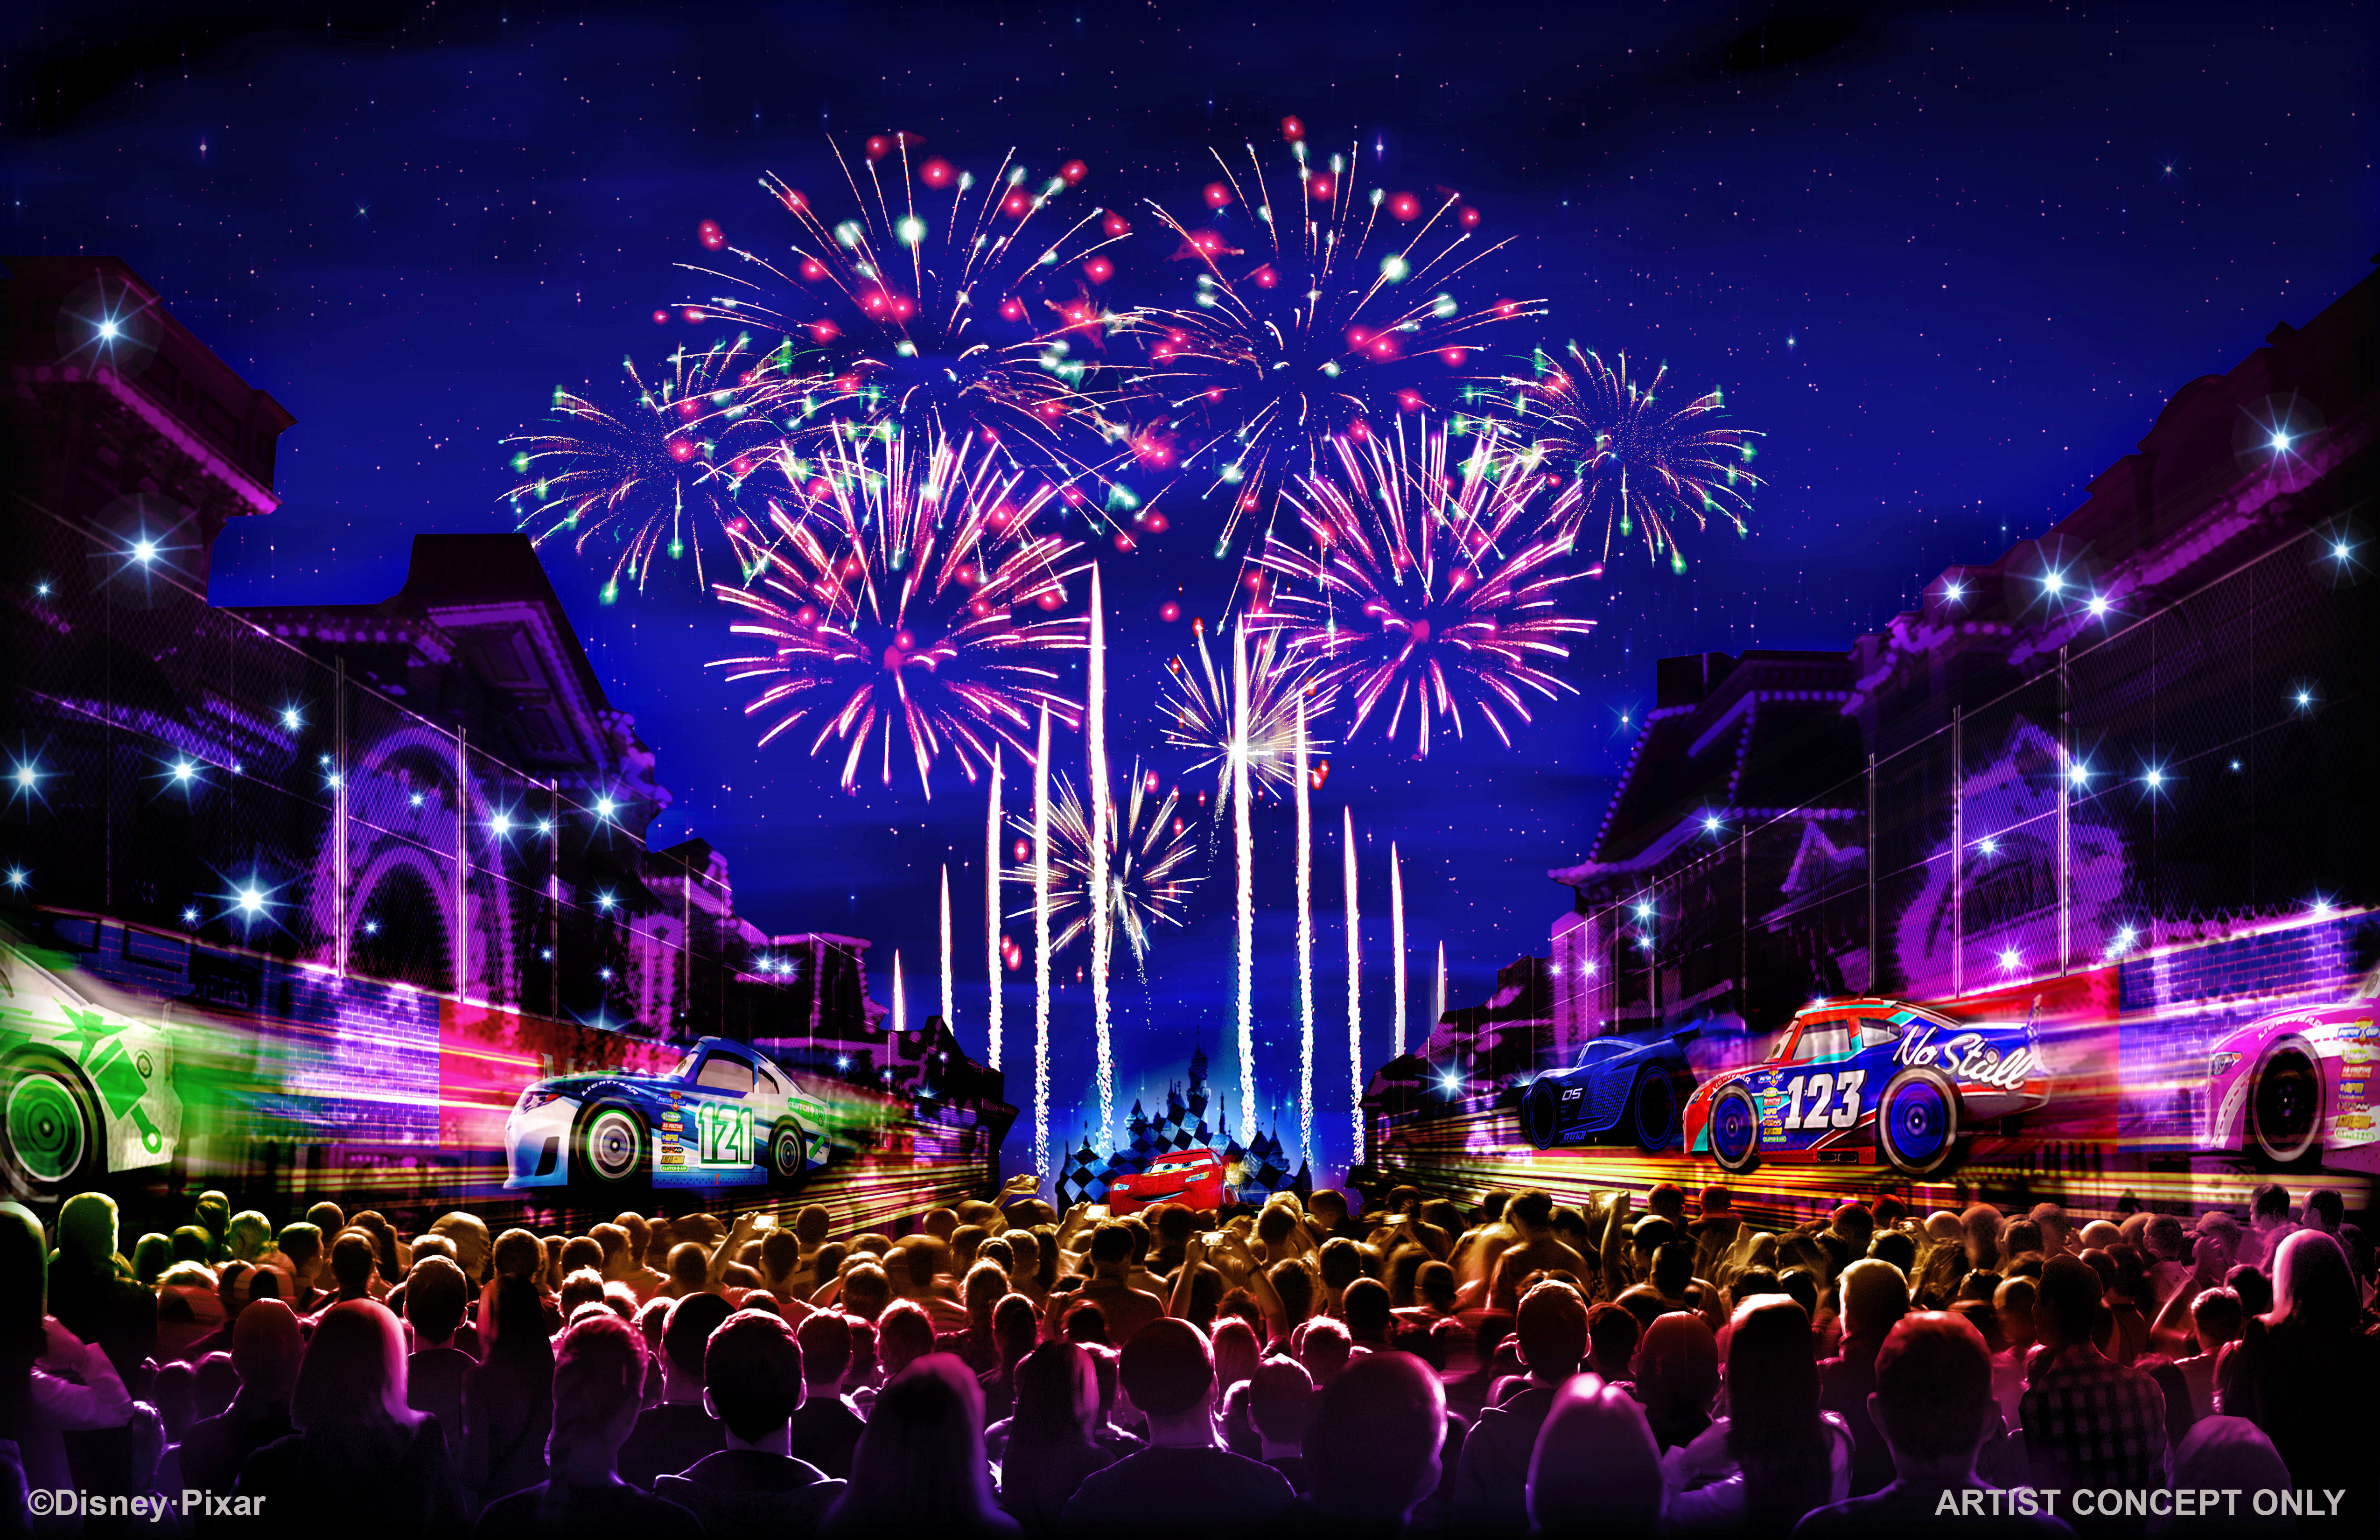 Pixar Fest, the Biggest Theme Park Celebration of Stories and Characters from Pixar Animation Studios, Comes to the Disneyland Resort April 13-Sept. 3, 2018